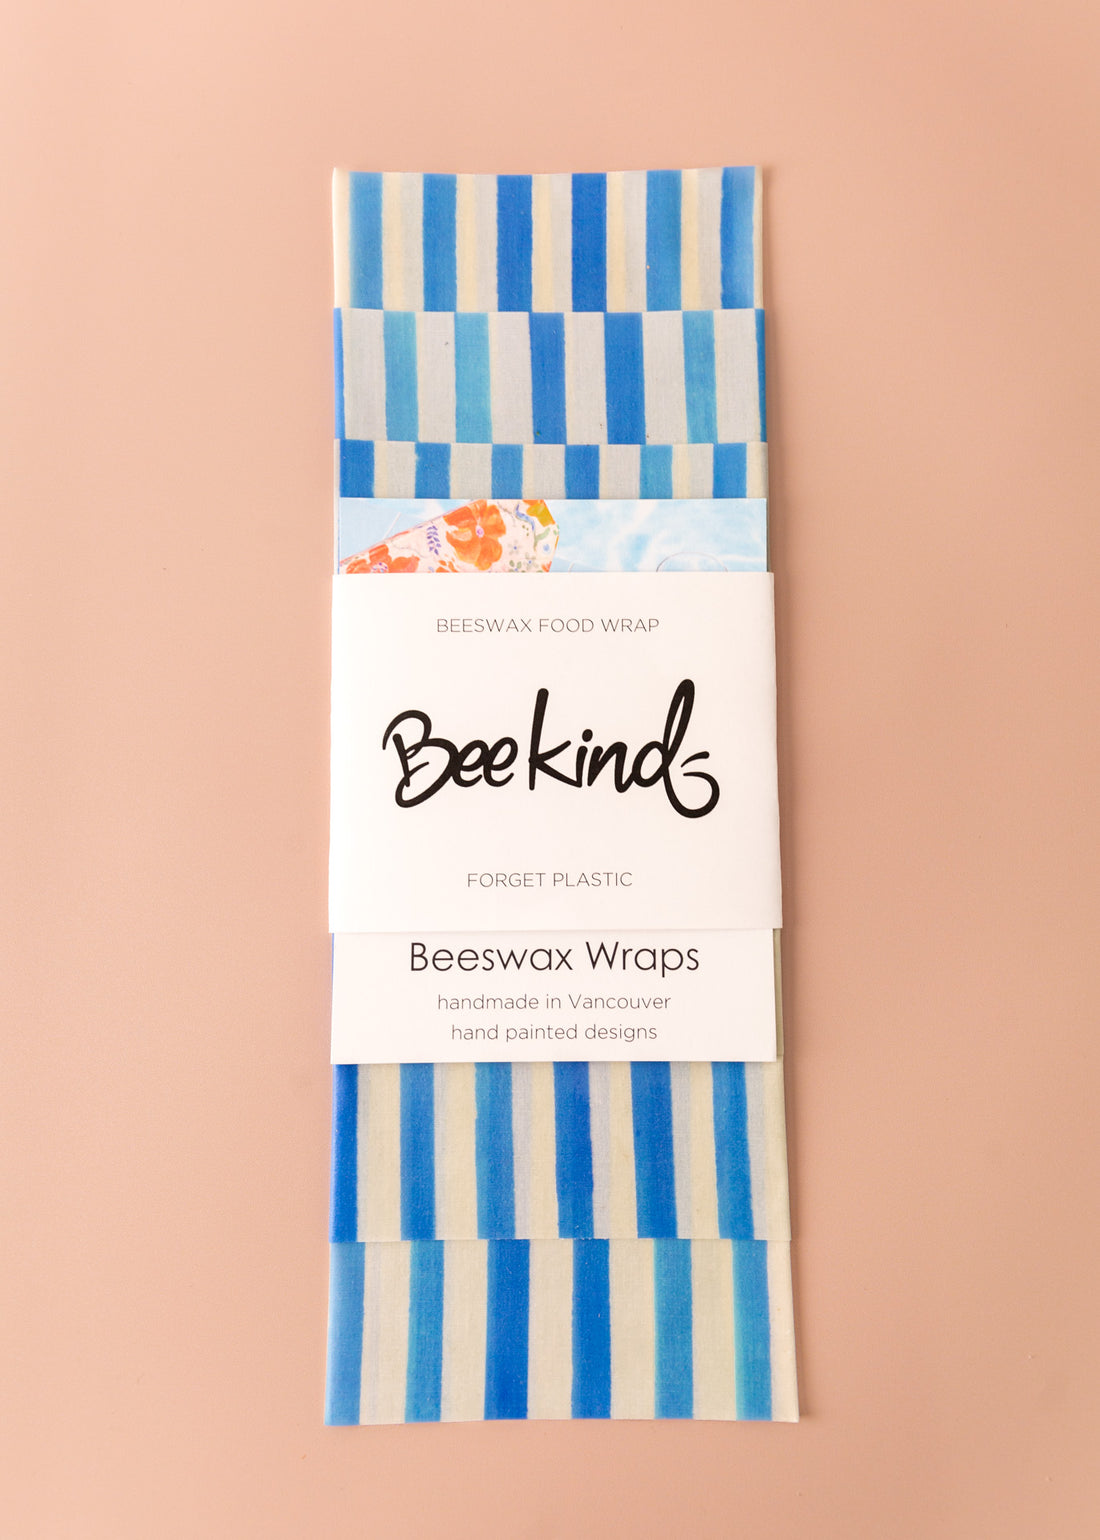 Set of 3 beeswax wraps that are off-white with thick blue stripes throughout, folded with a white label saying "beekind" on a pink flatlay